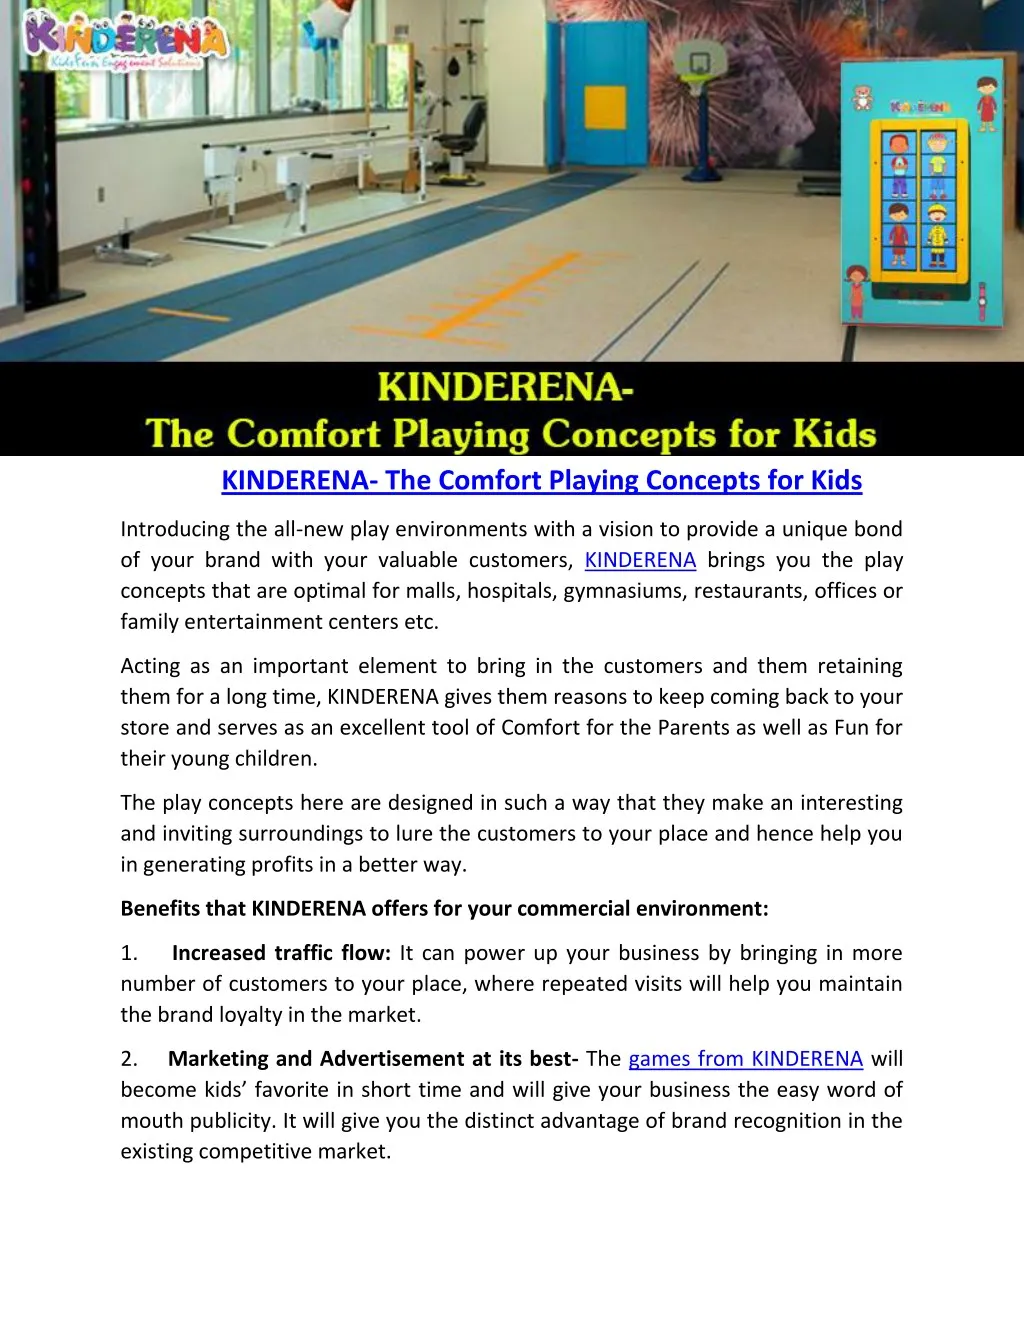 kinderena the comfort playing concepts for kids